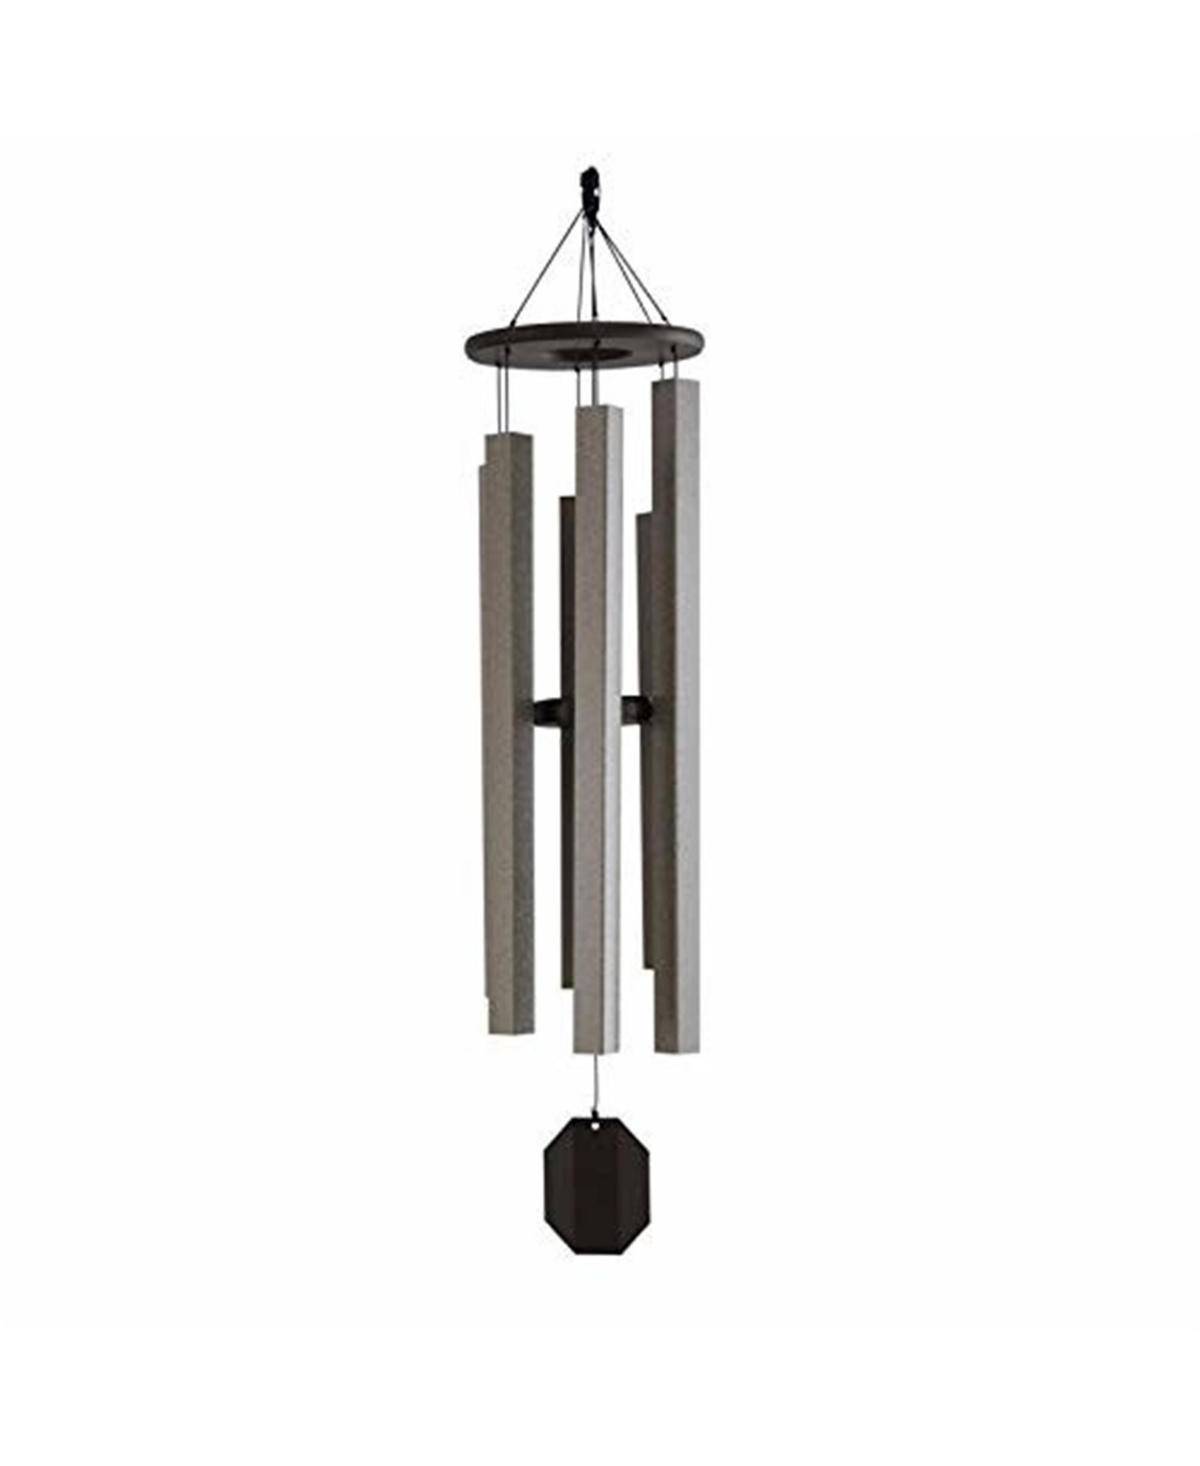 Dutch Bell Wind Chime Amish Crafted Chimes, 46in - Multi